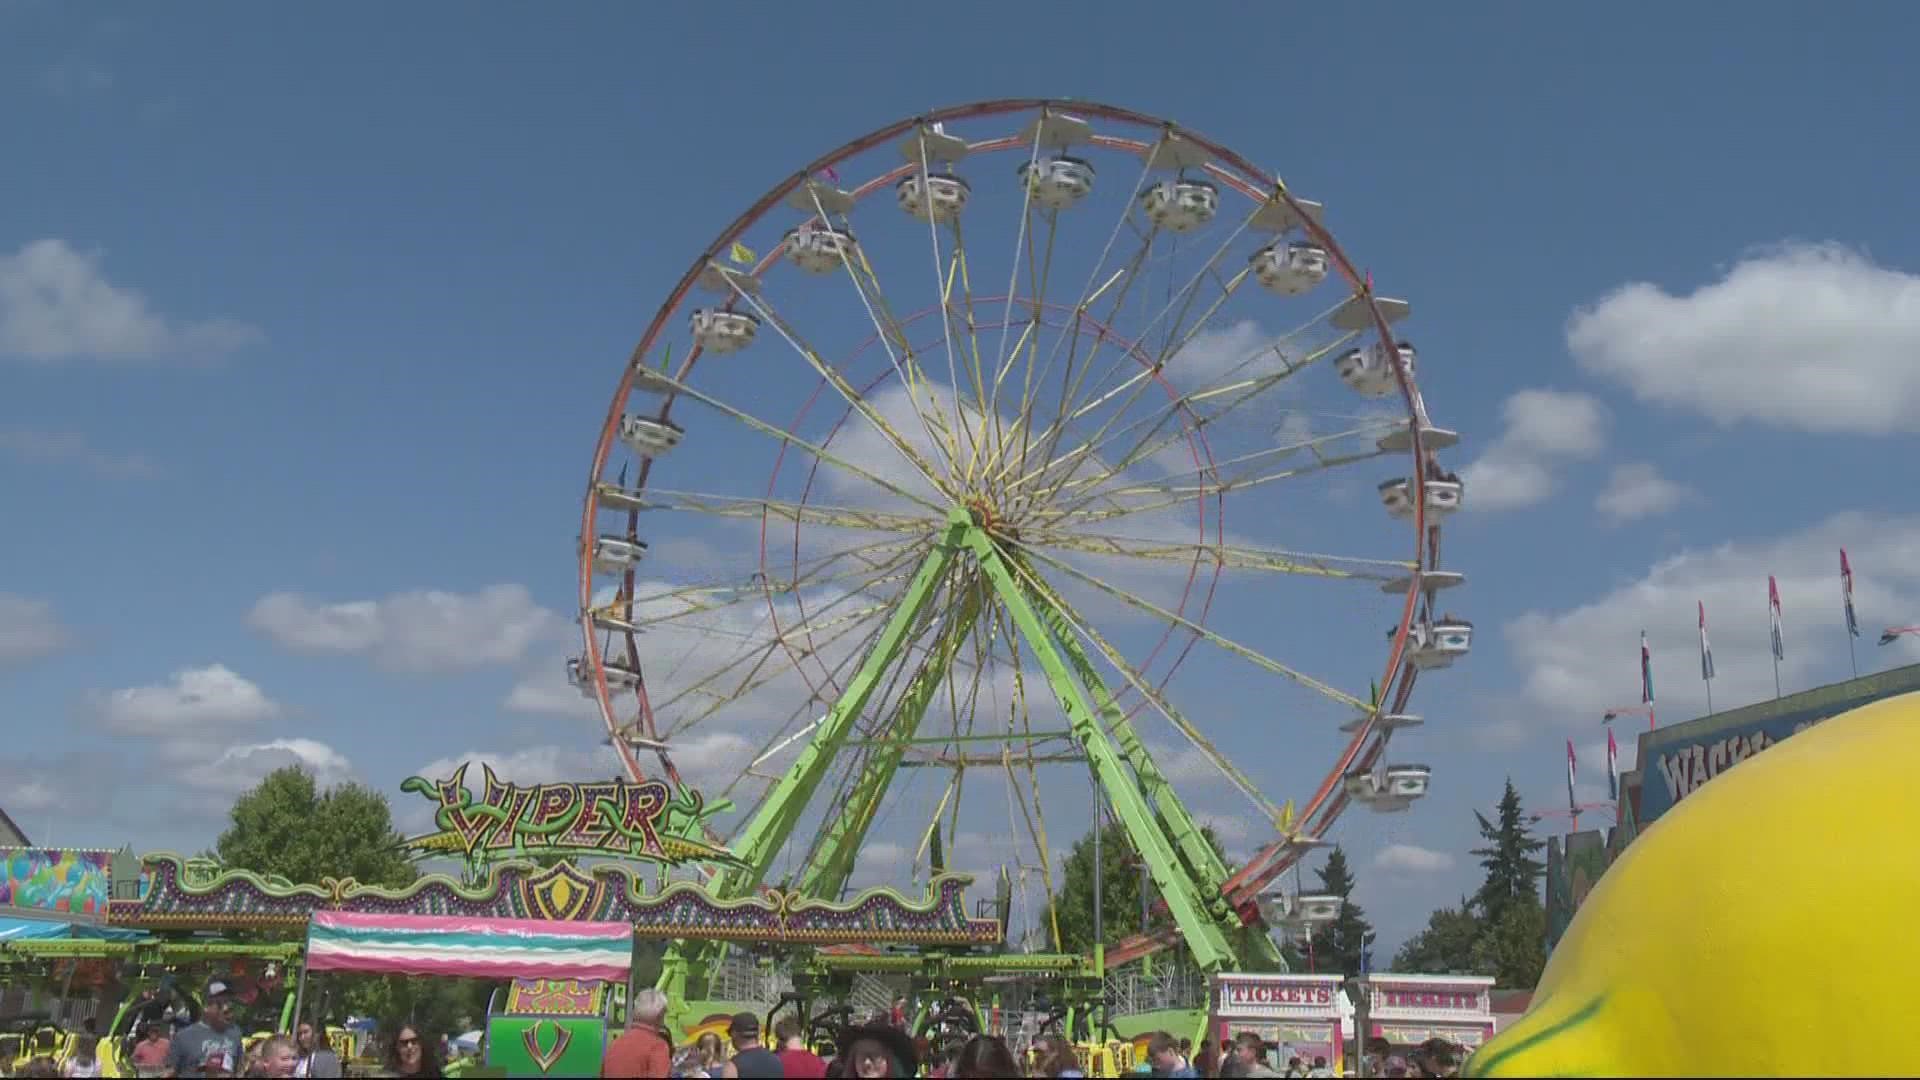 People came out in droves to experience the fair again. This year the fair featured both old favorites and some new experiences.